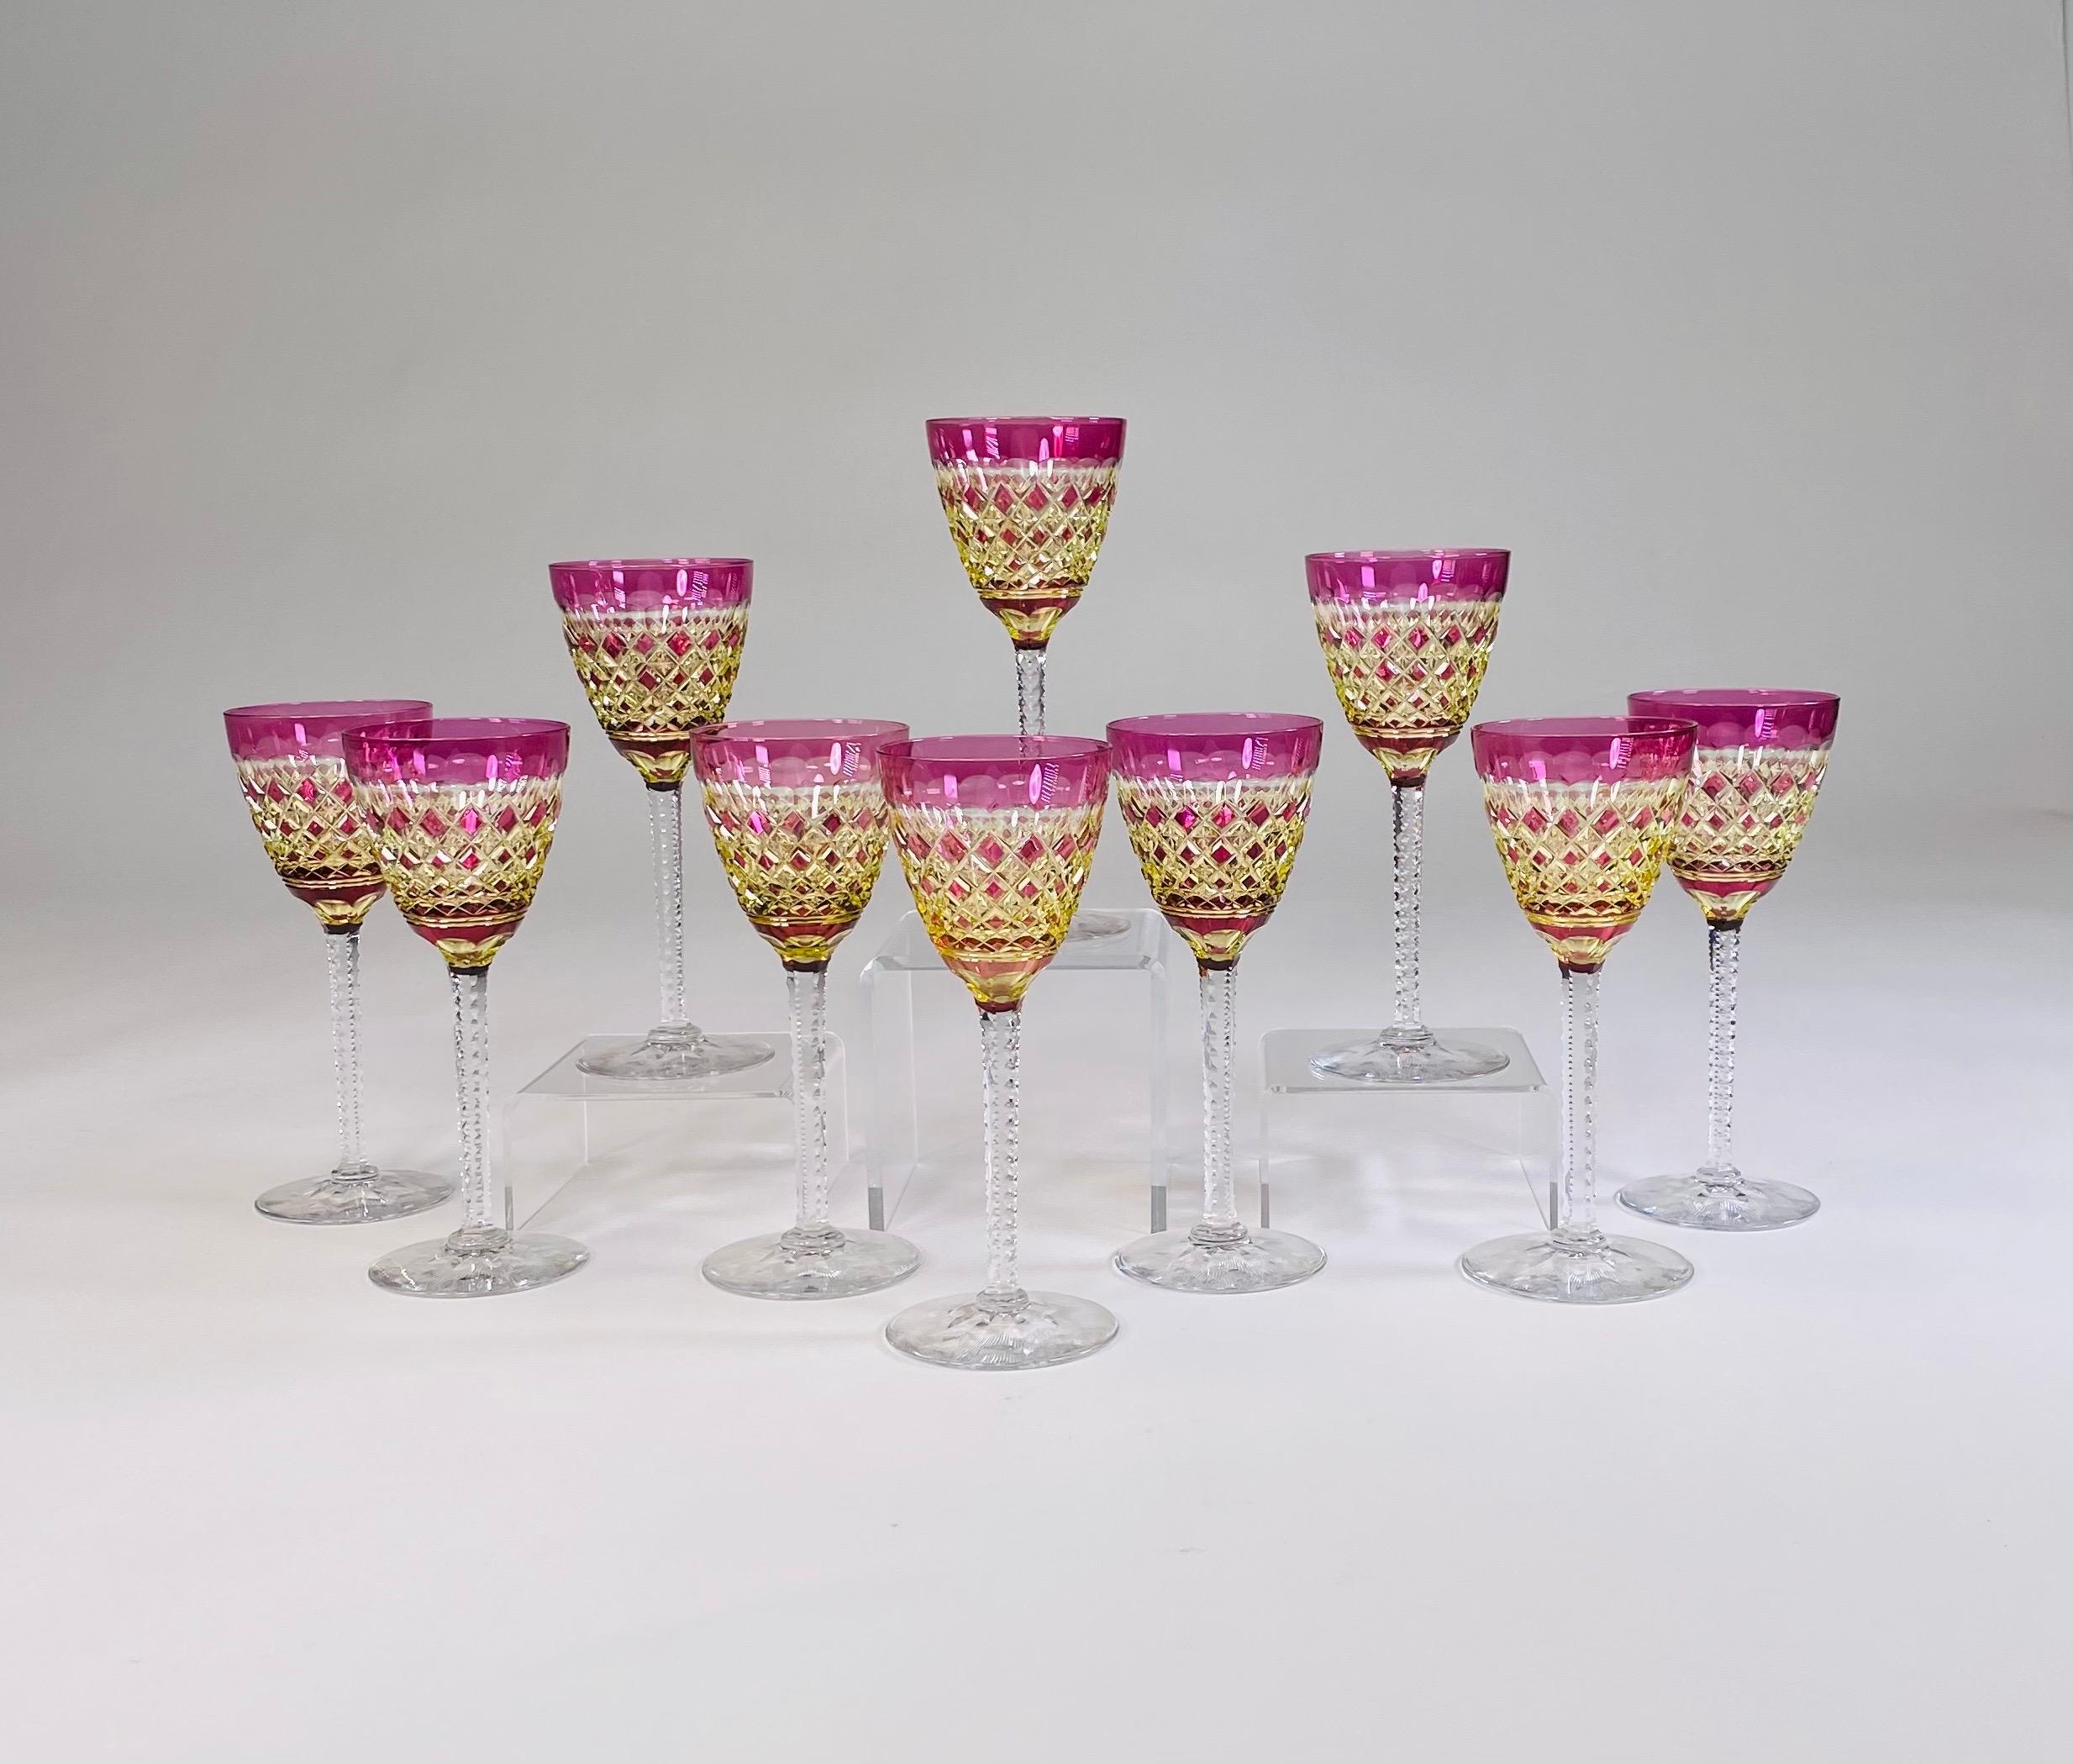 Early 20th Century Set of 10 Val Saint Lambert Amethyst Overlay Cut to Chartreuse Goblets